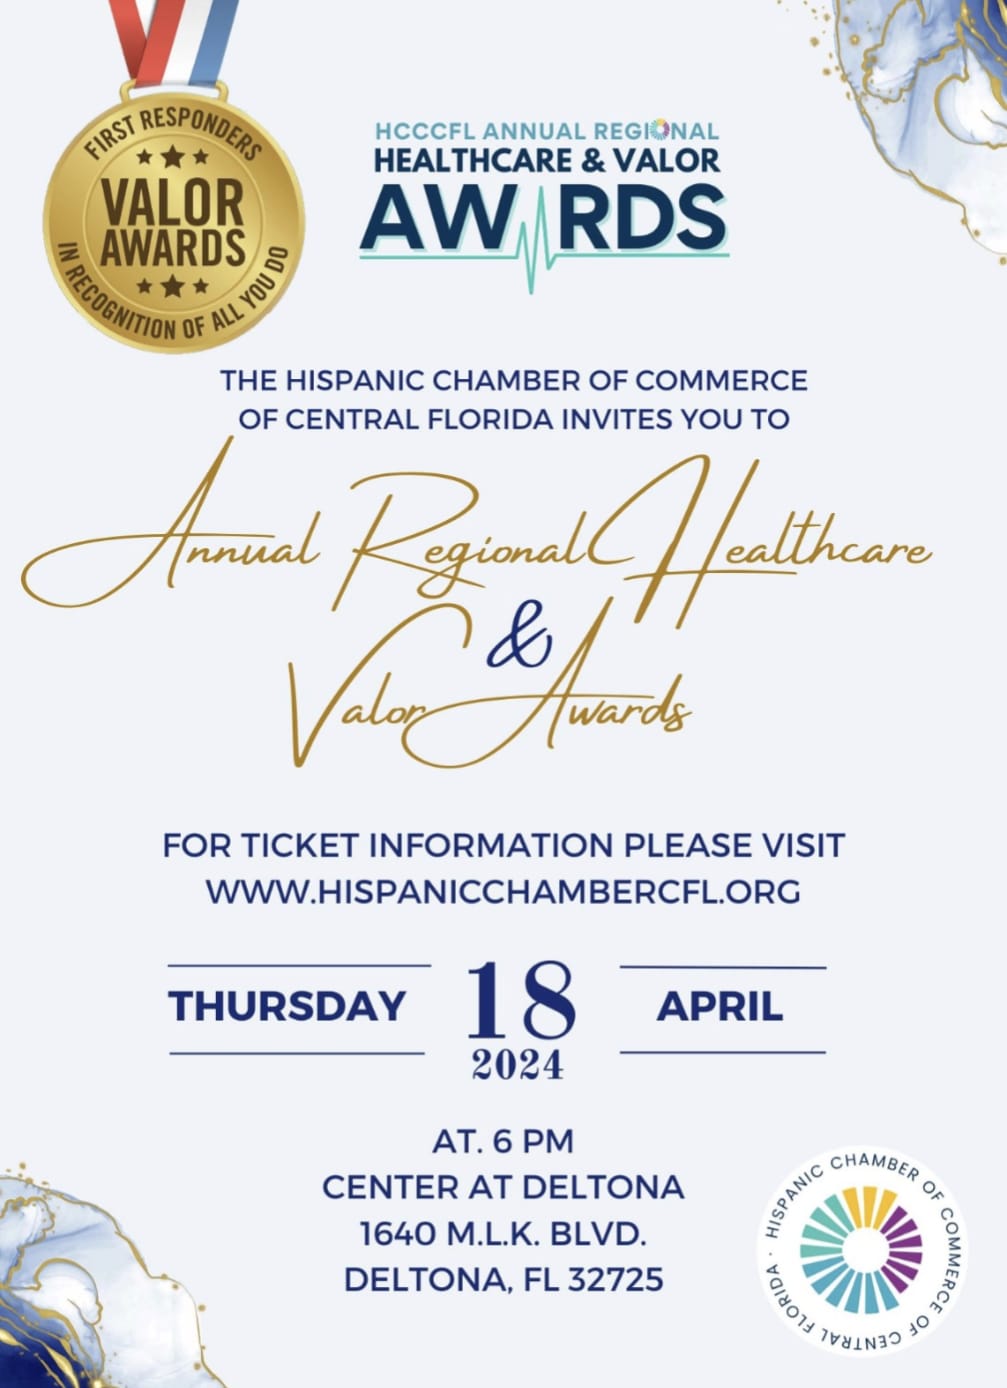 Healthcare & Valor Awards - Hispanic Chamber of Commerce of Central Florida